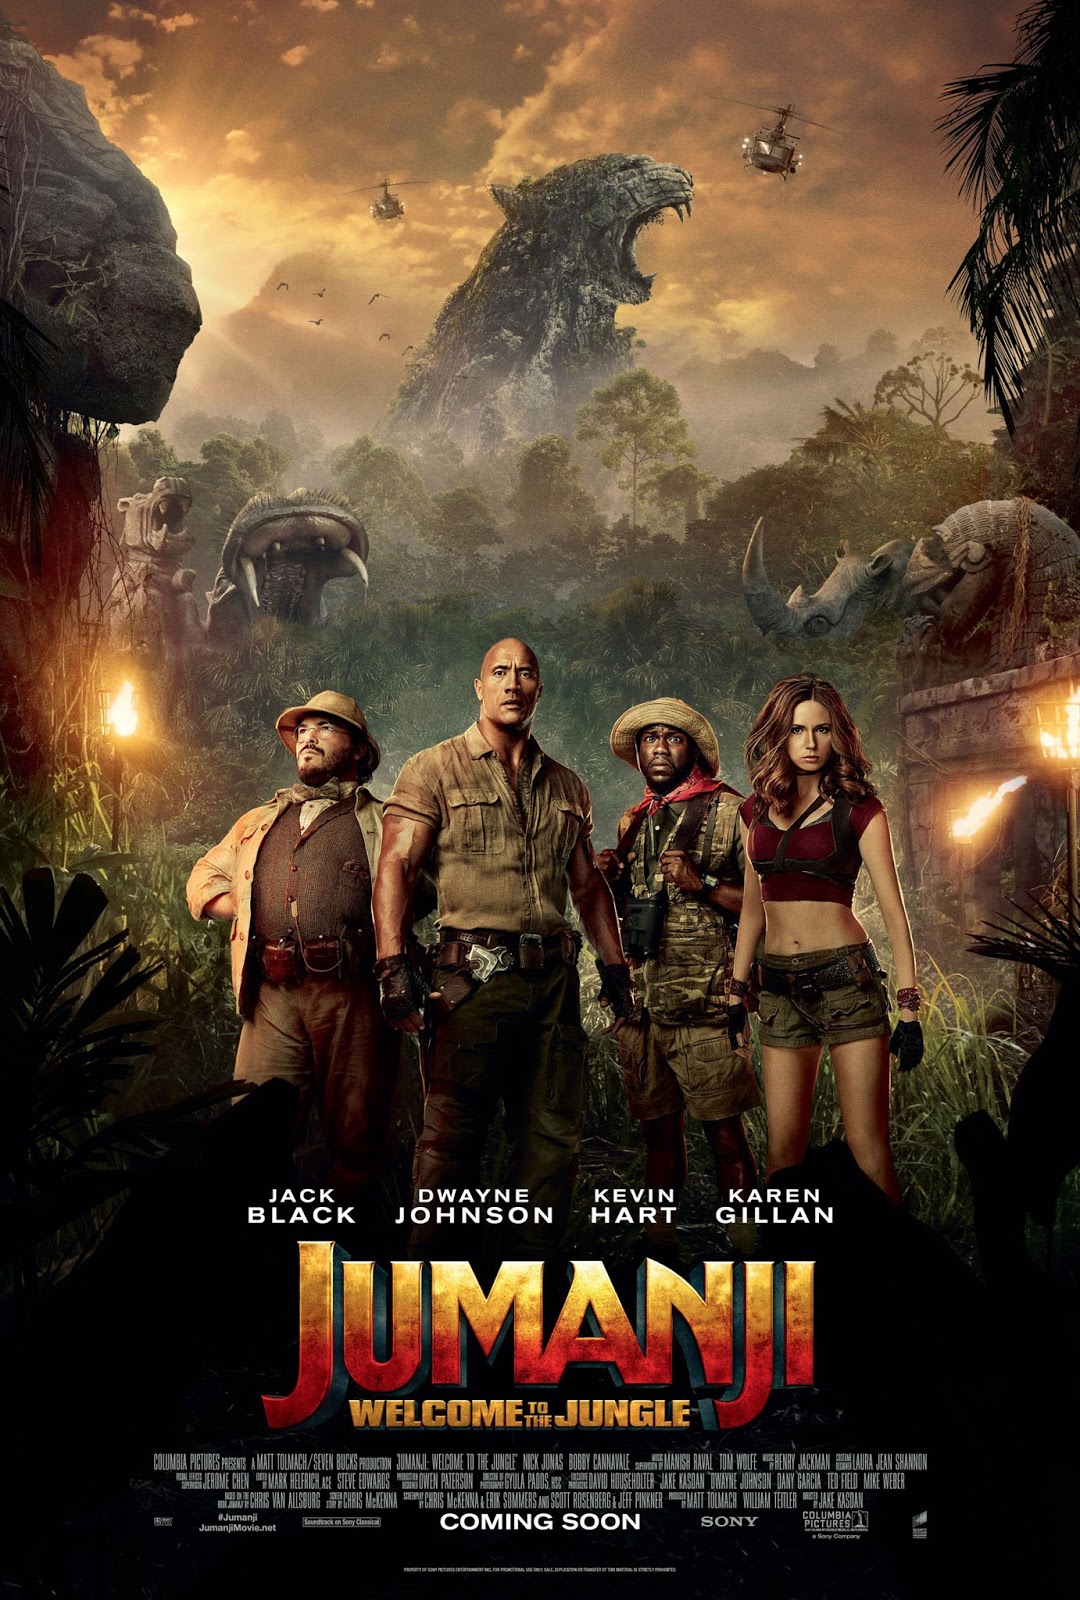 Jumanji: The Next Level' reviews: What critics are saying